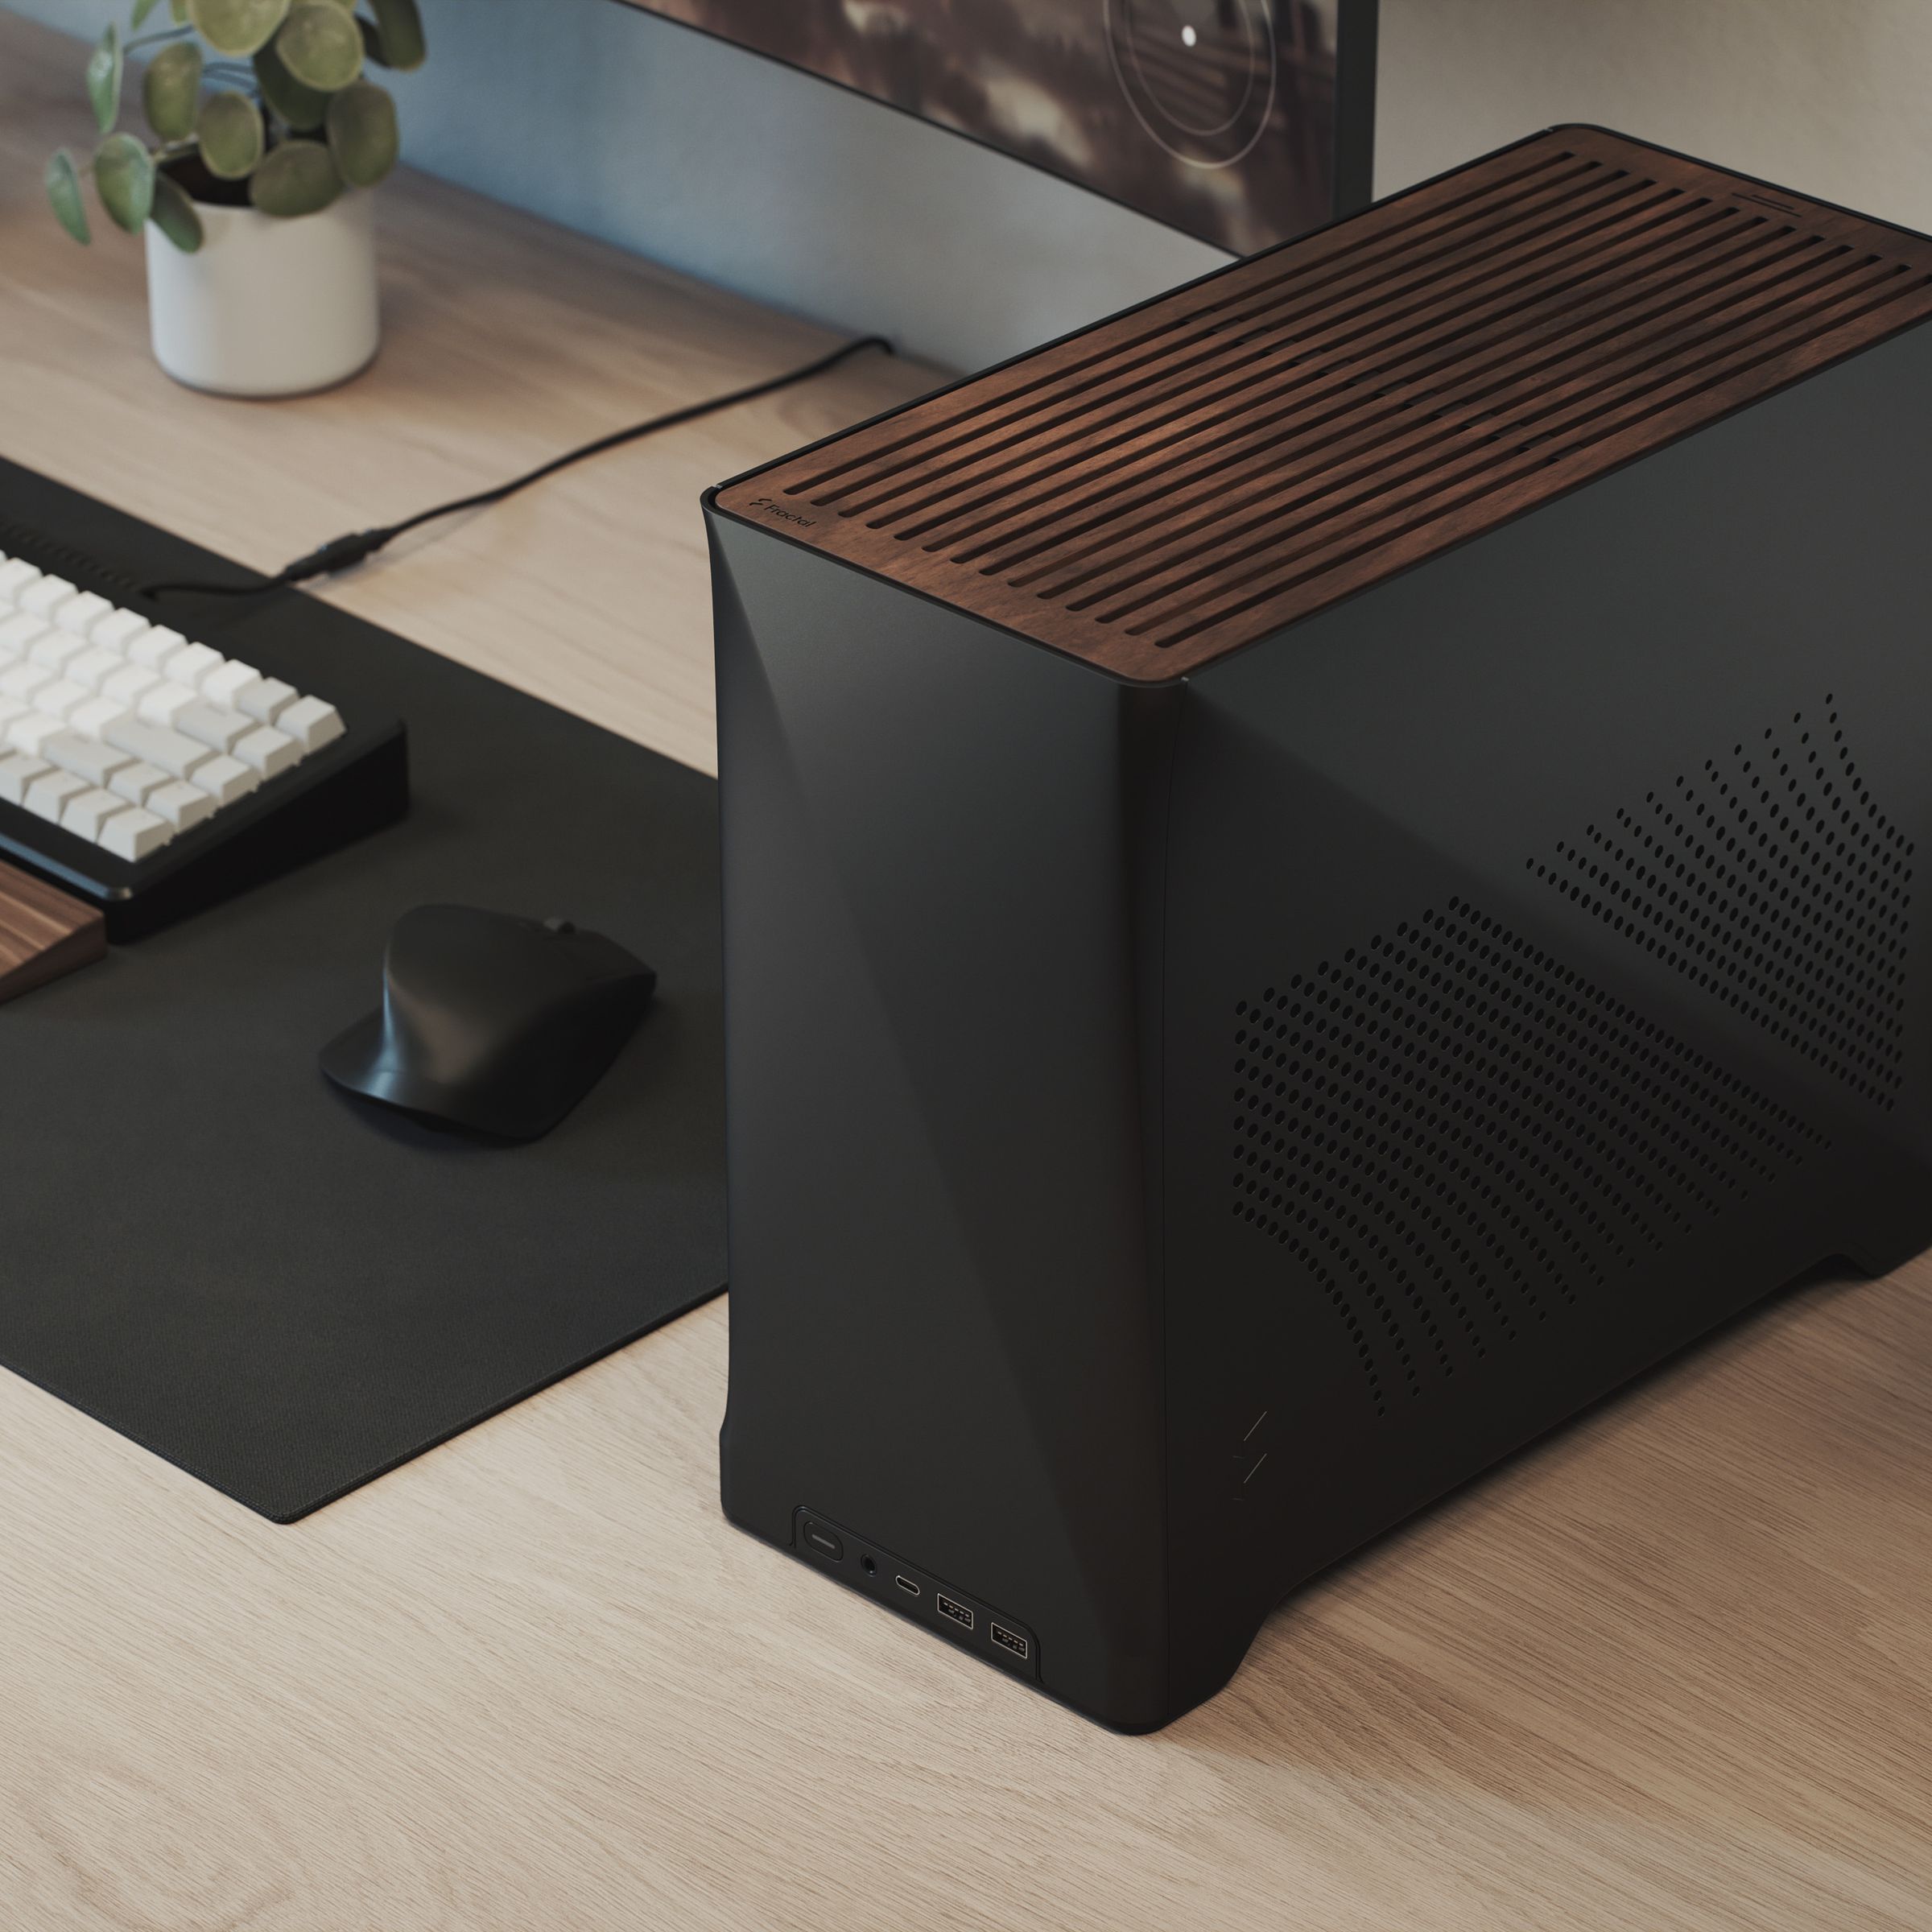 A small desktop PC case with wood paneling on the top next to a keyboard, mouse, and monitor.